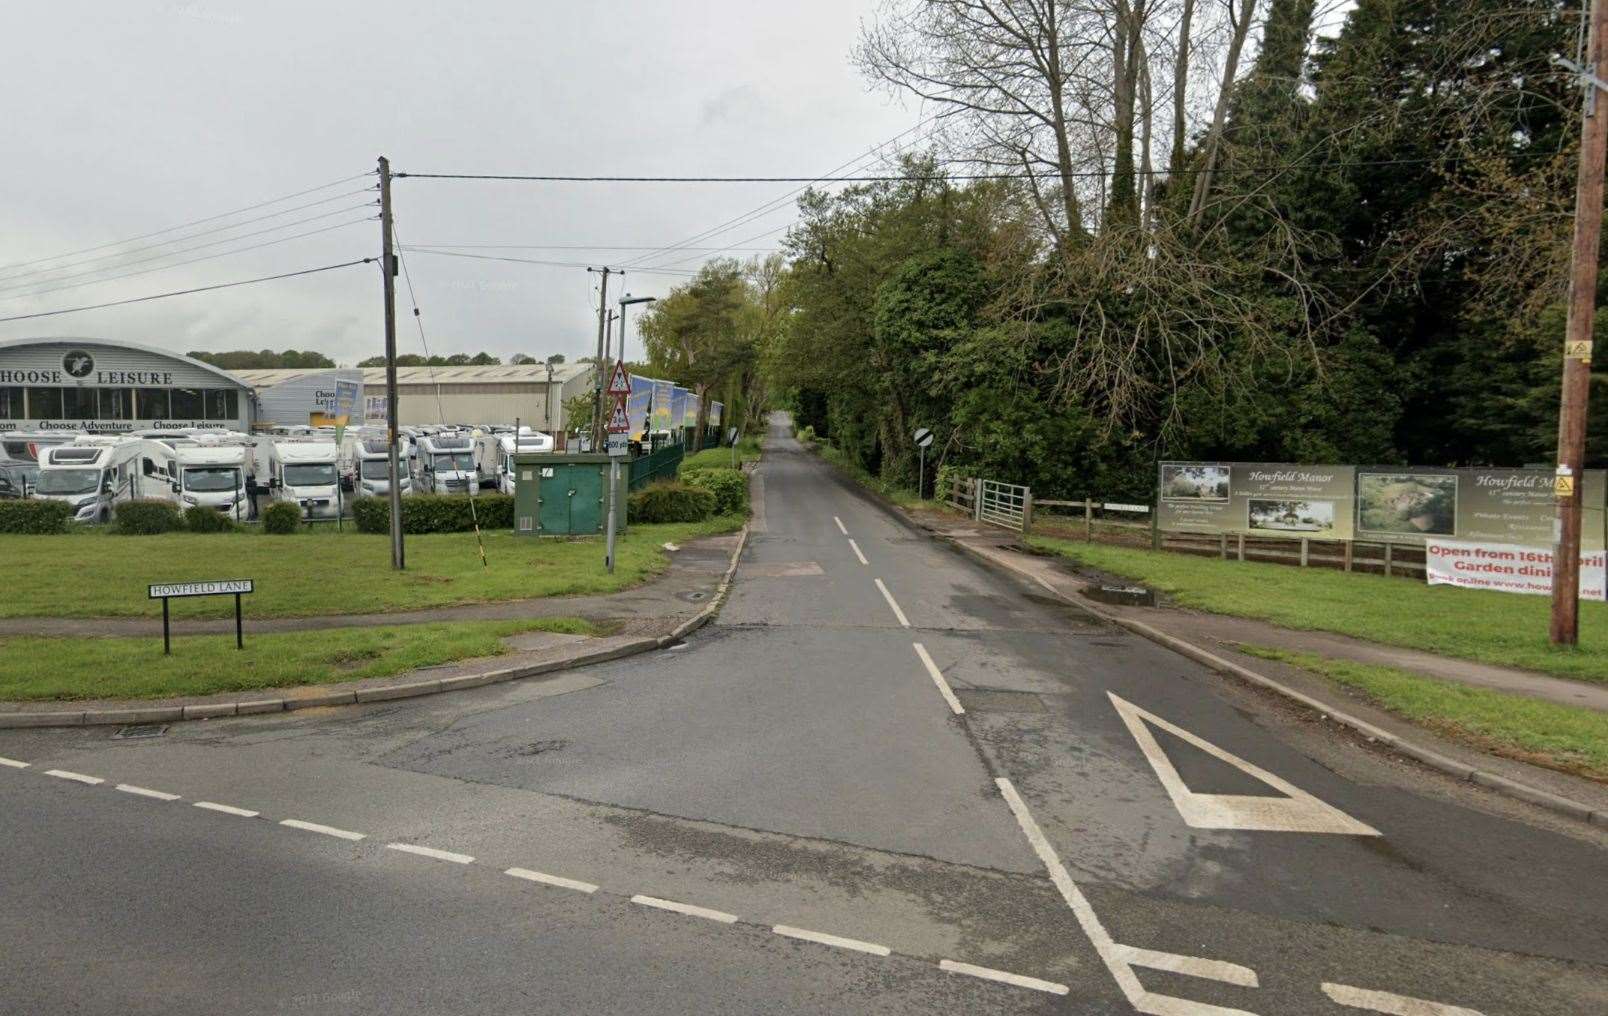 Howfield Lane in Chartham is one of the roads affected. Picture: Google